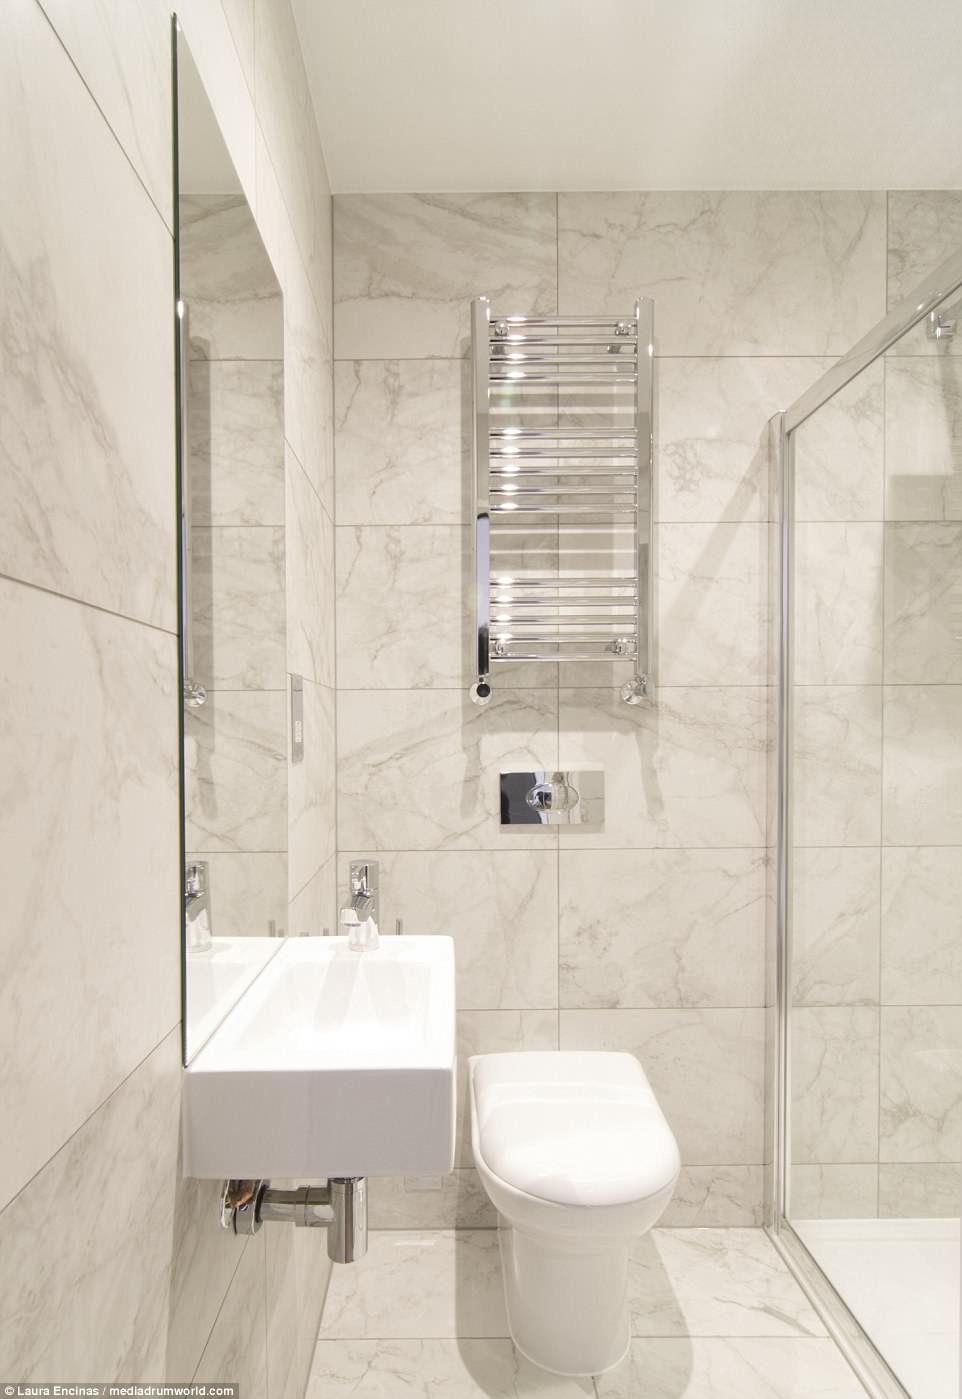 High specification: The porcelain-tiled bathrooms come complete with a walk-in shower, square sink and stainless steel finishing 